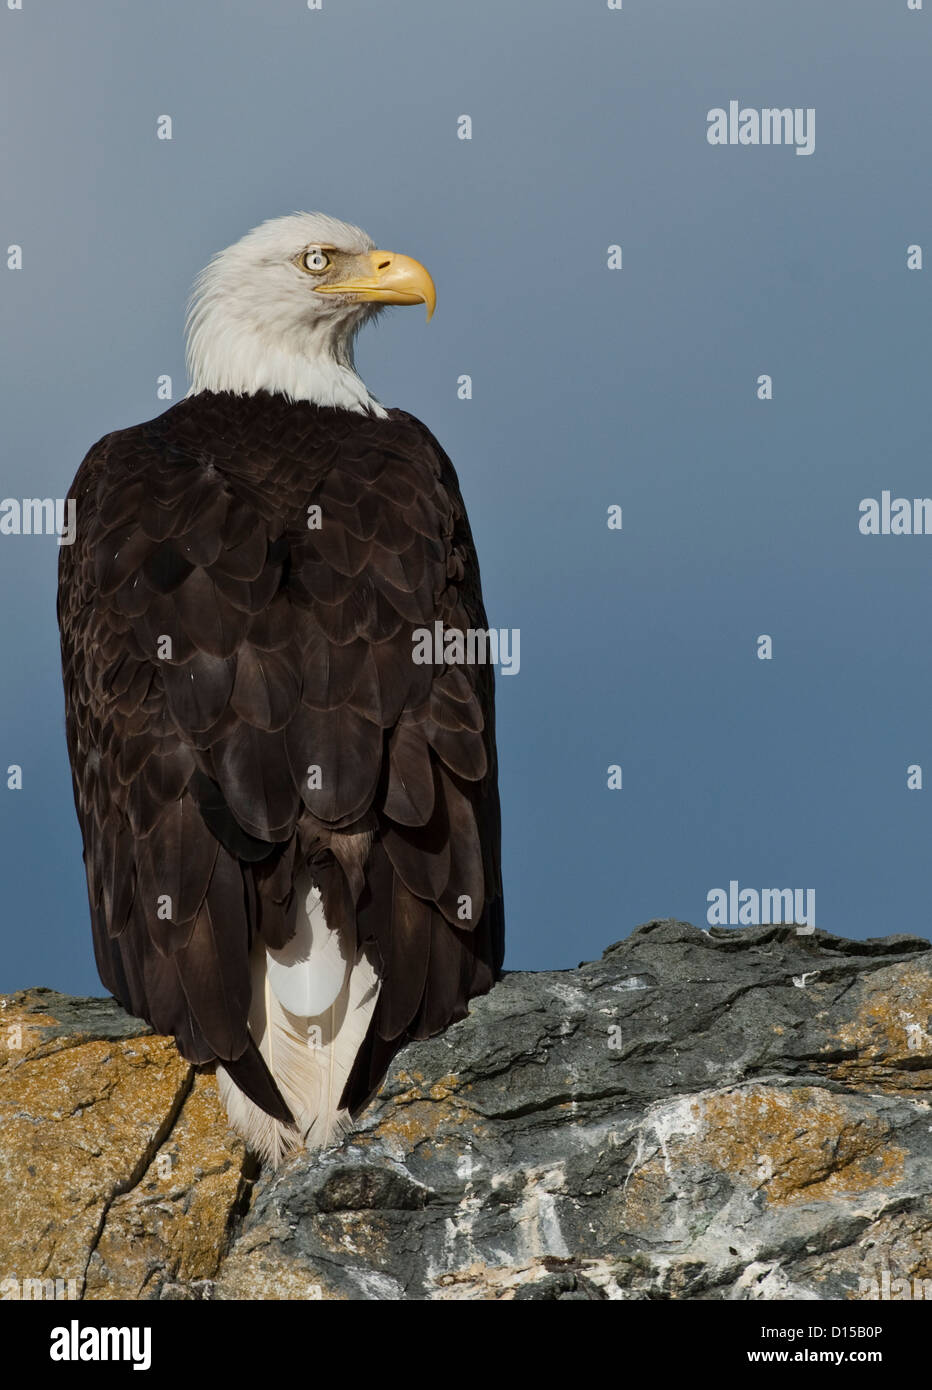 A Bald Eagle, Haliaeetus leucocephalus, rests on a rocky perch north of Vancouver Island, British Columbia, Canada. Stock Photo